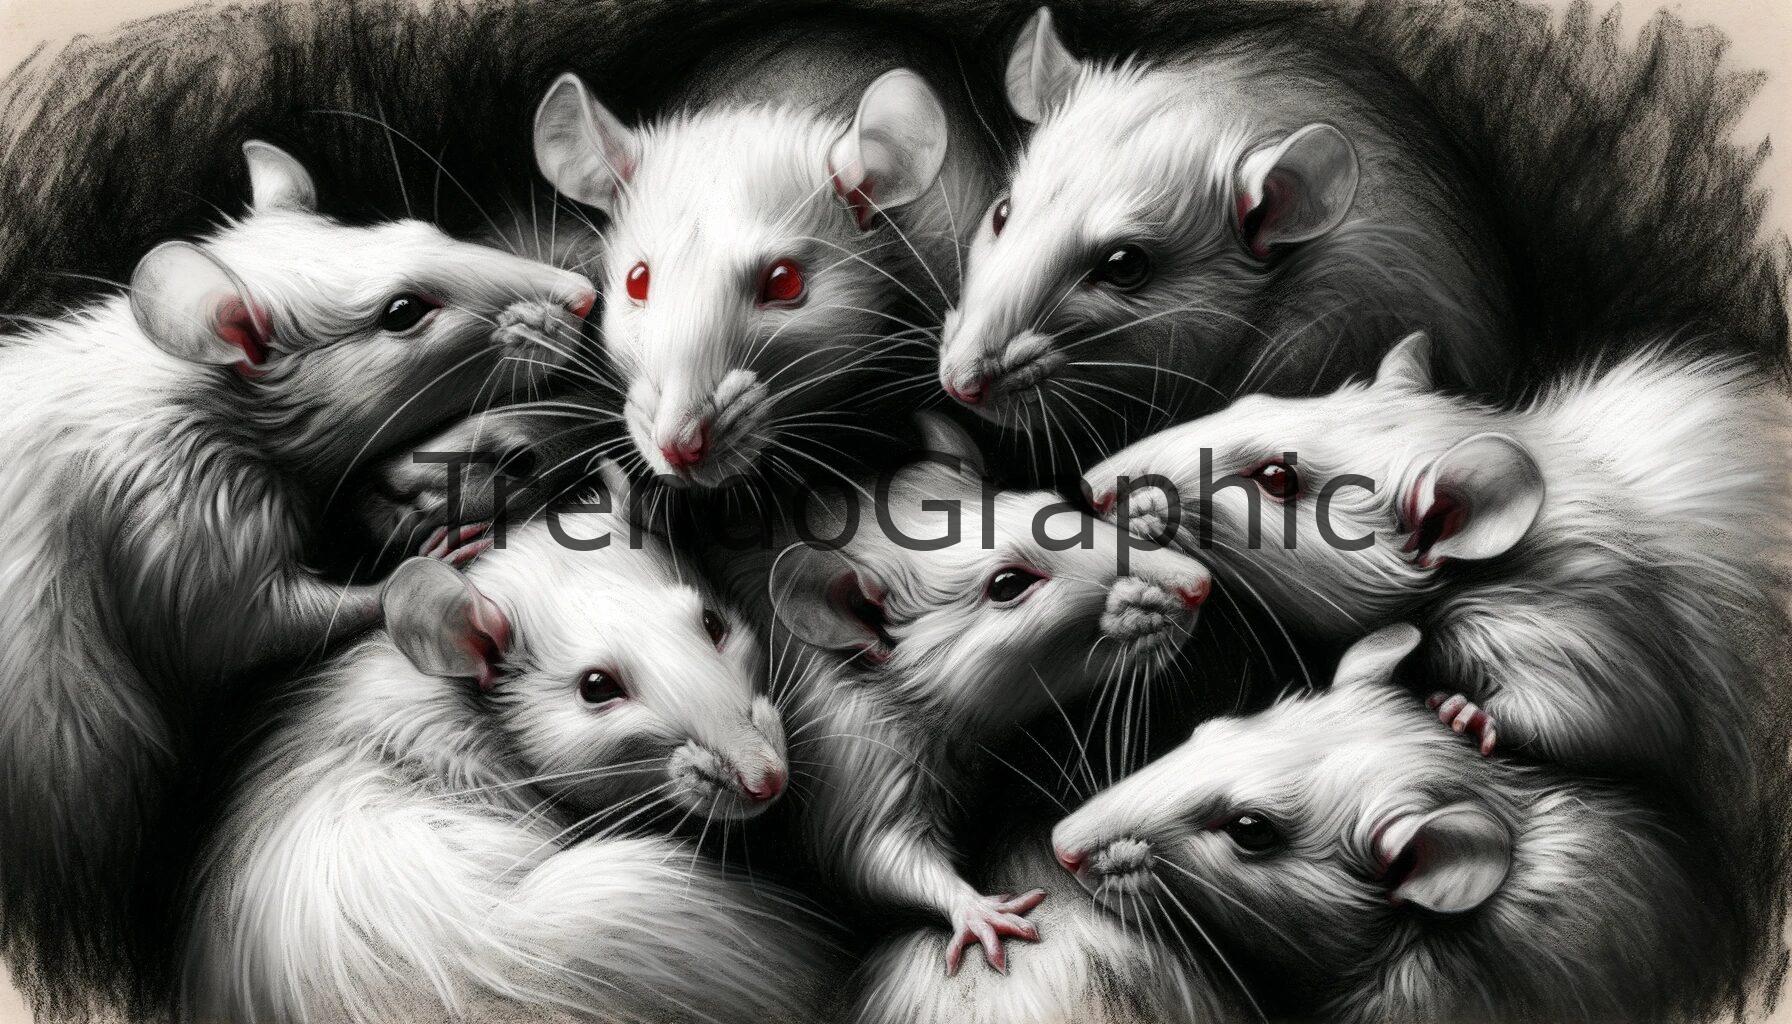 Camaraderie in White: A Group of Albino Rats